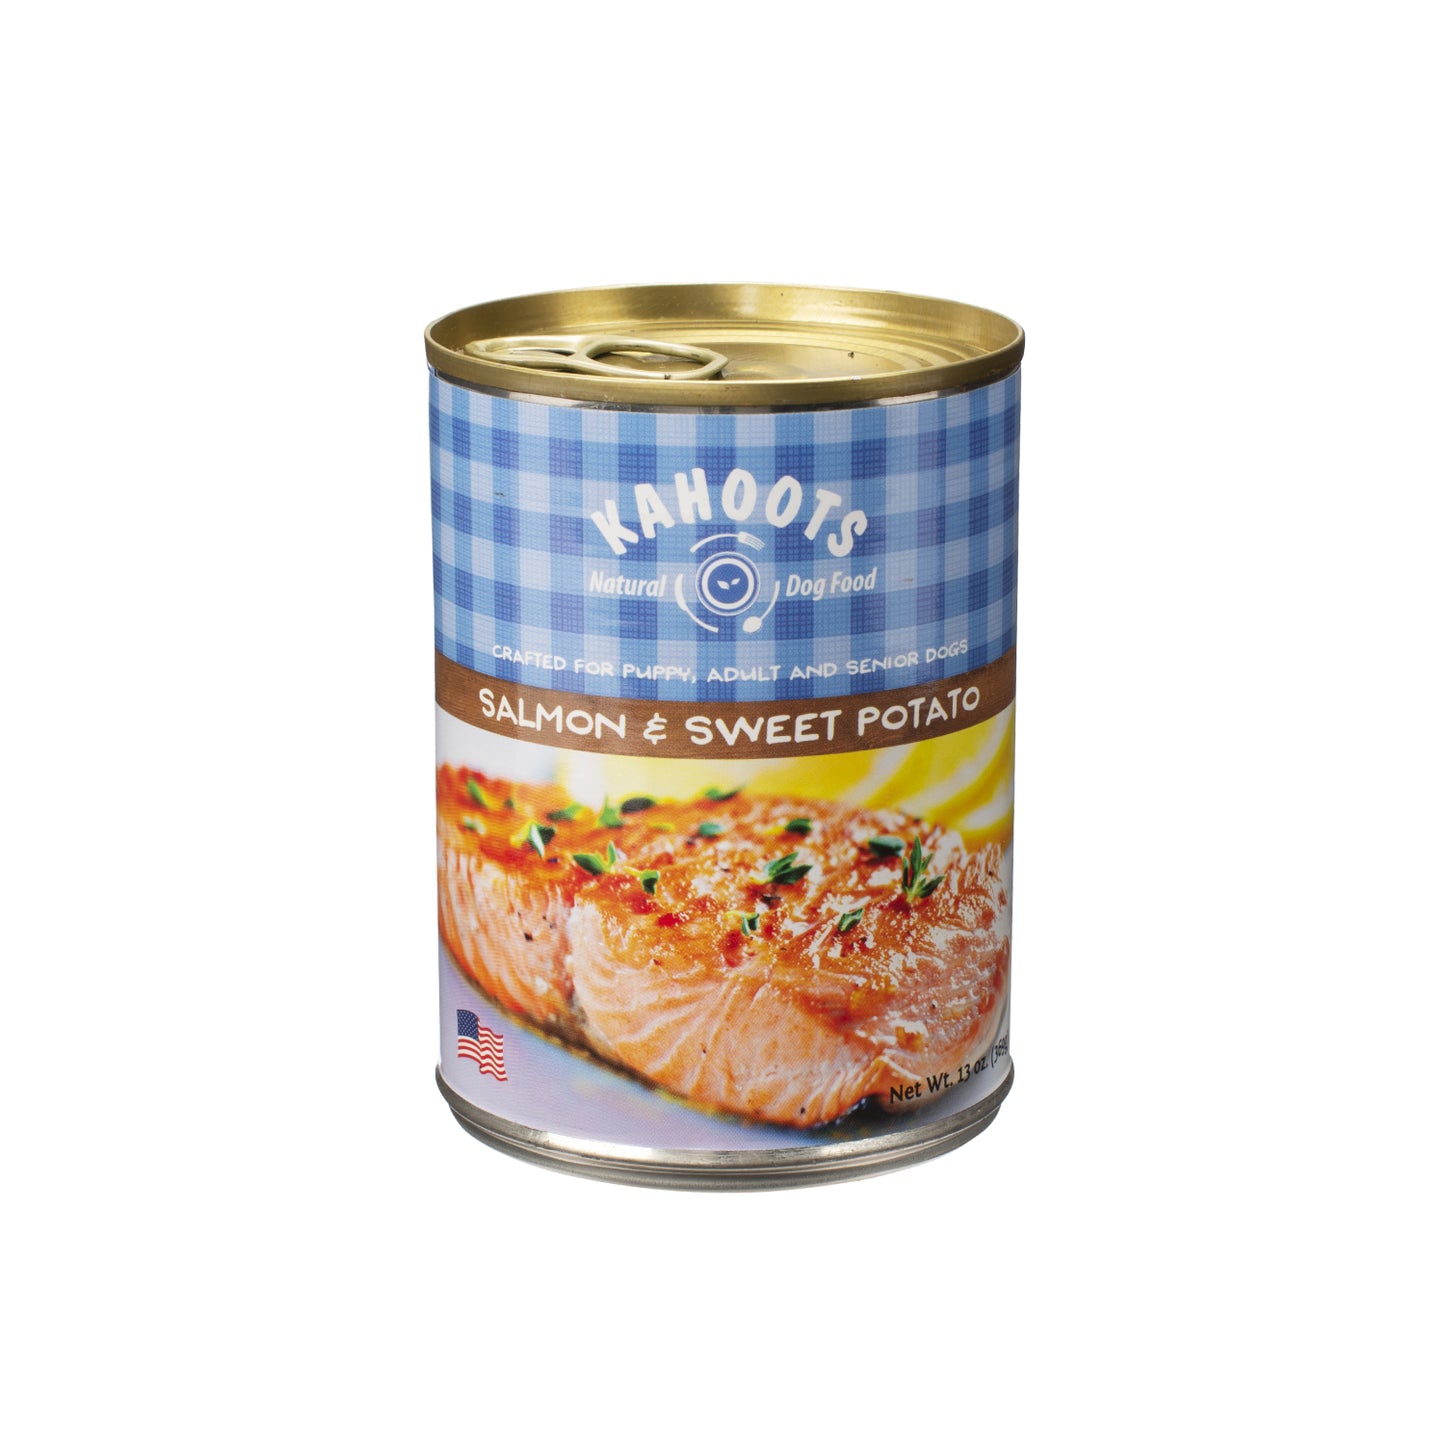 Salmon and sweet potato wet dog food can. Picture of seared salmon dinner over blue checked background on label